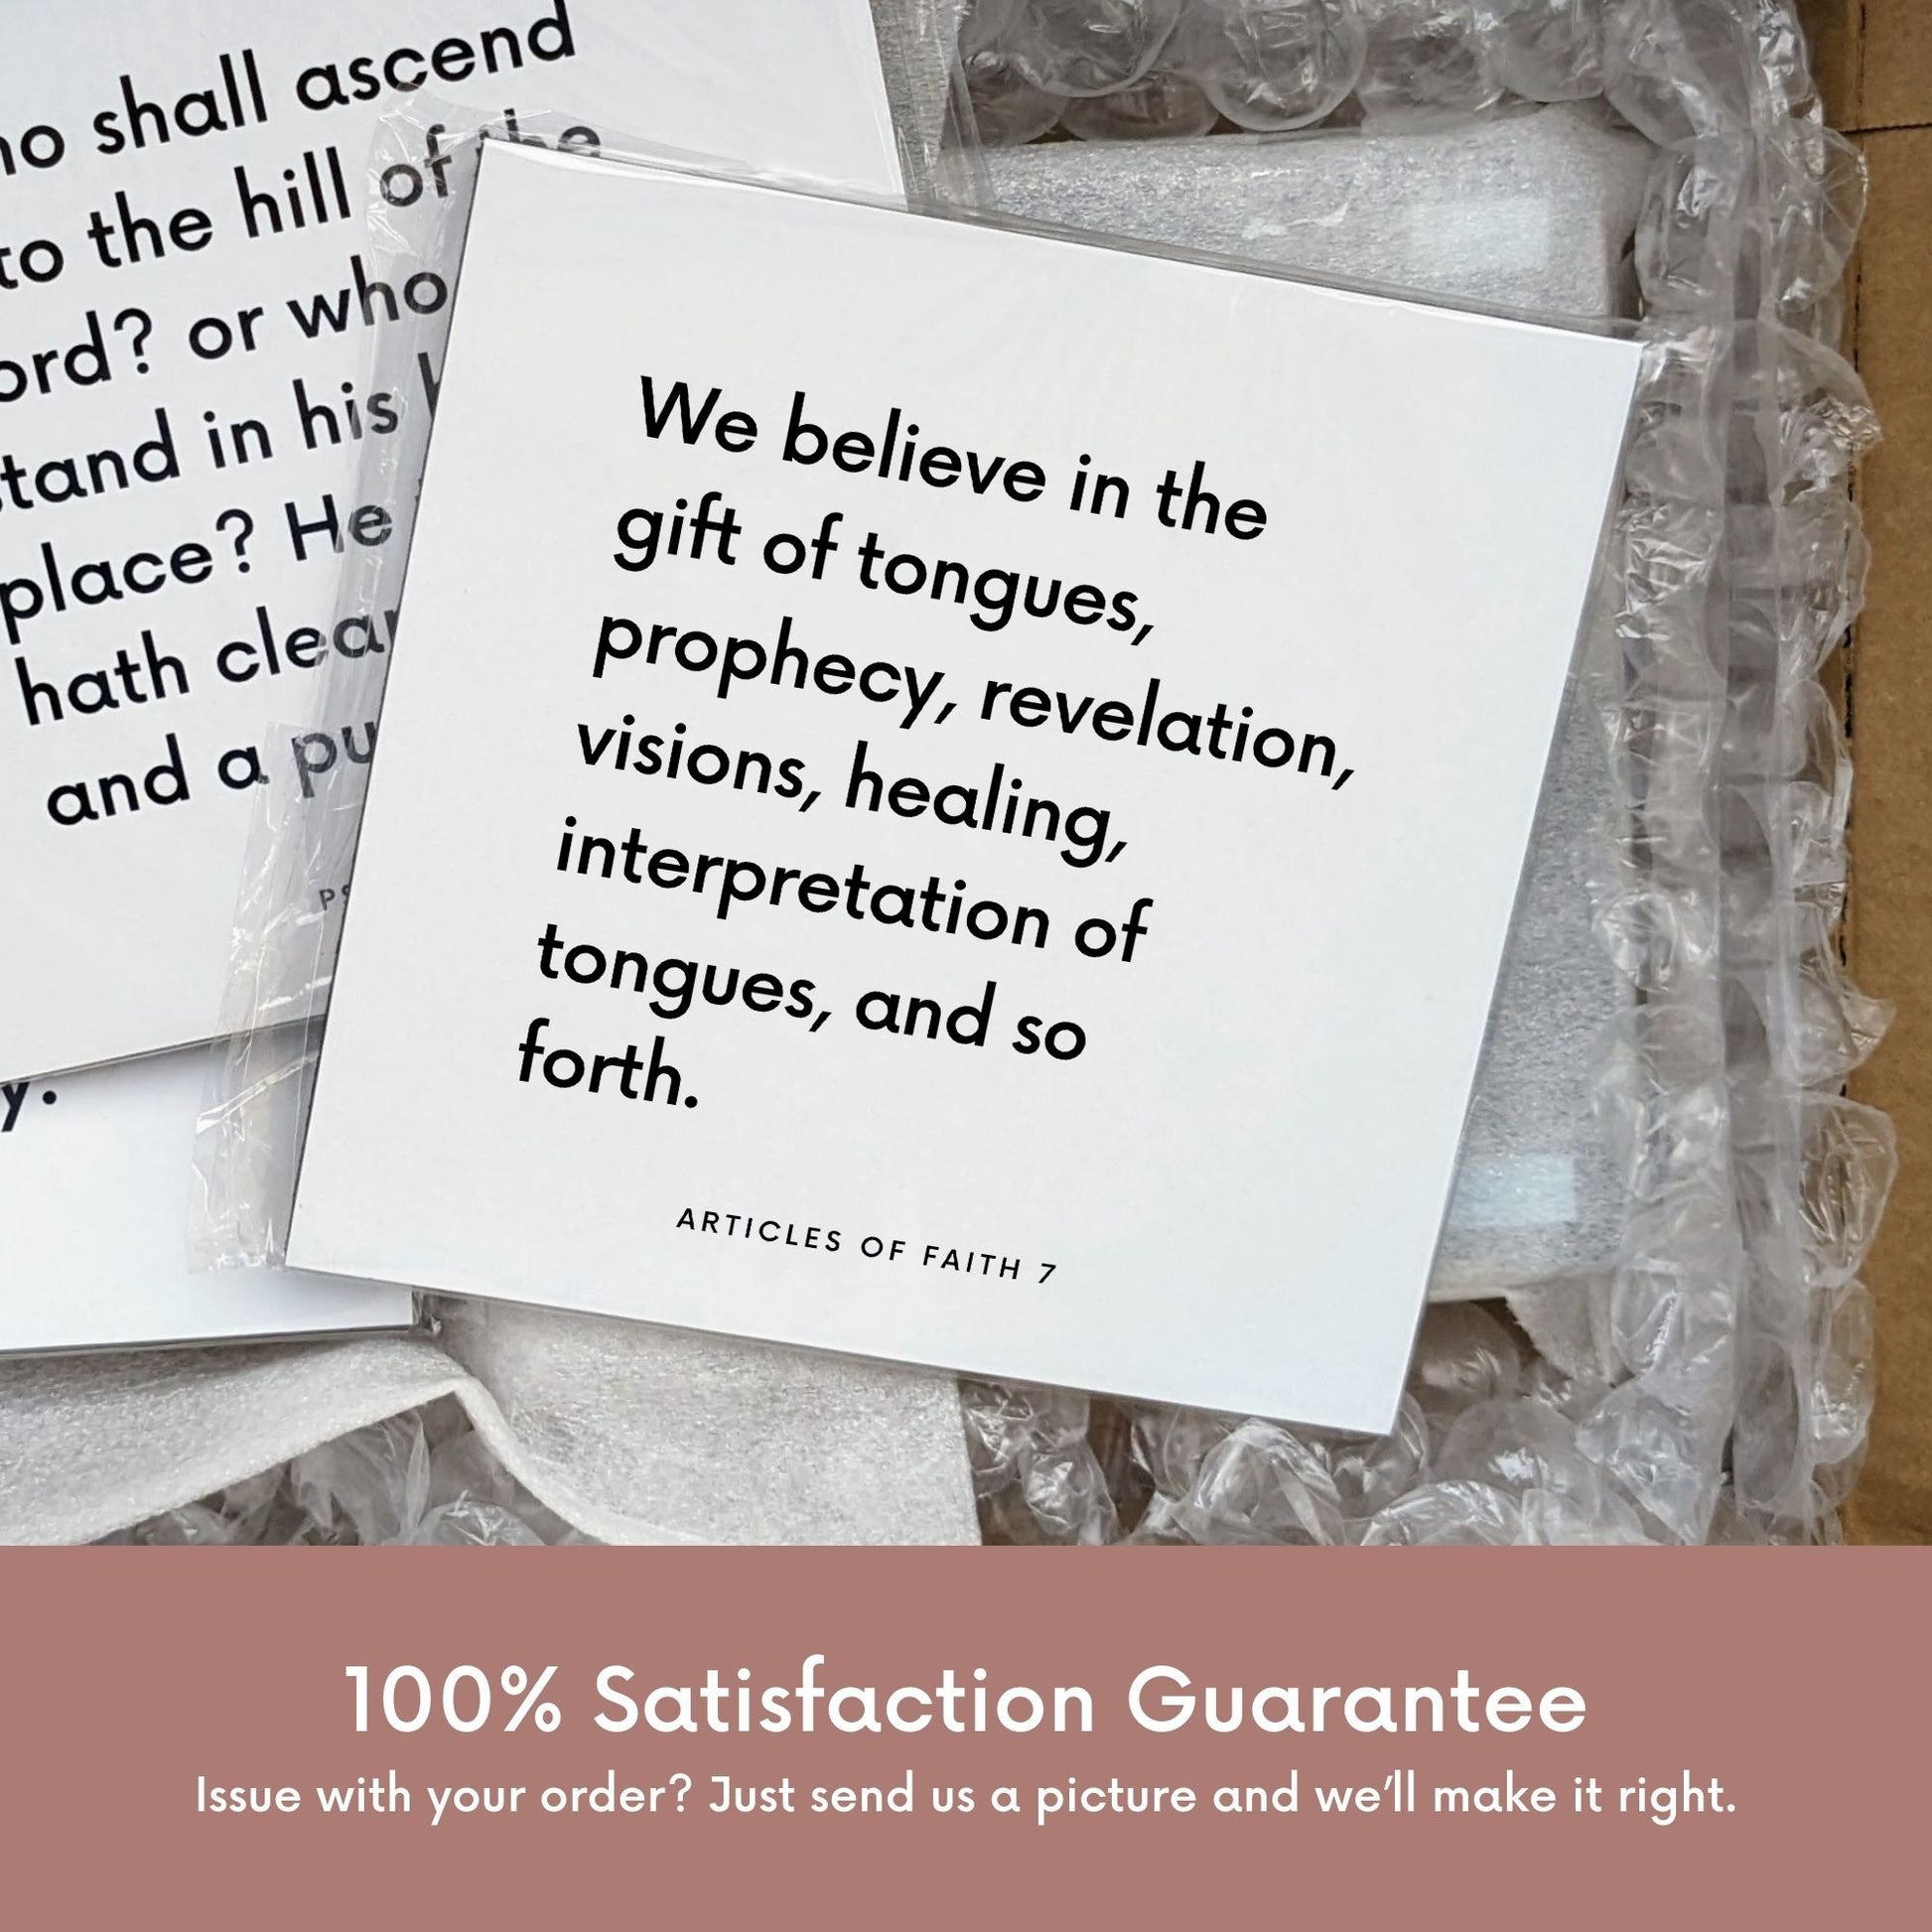 Shipping materials for scripture tile of Articles of Faith 7 - "We believe in the gift of tongues, prophecy, revelation"